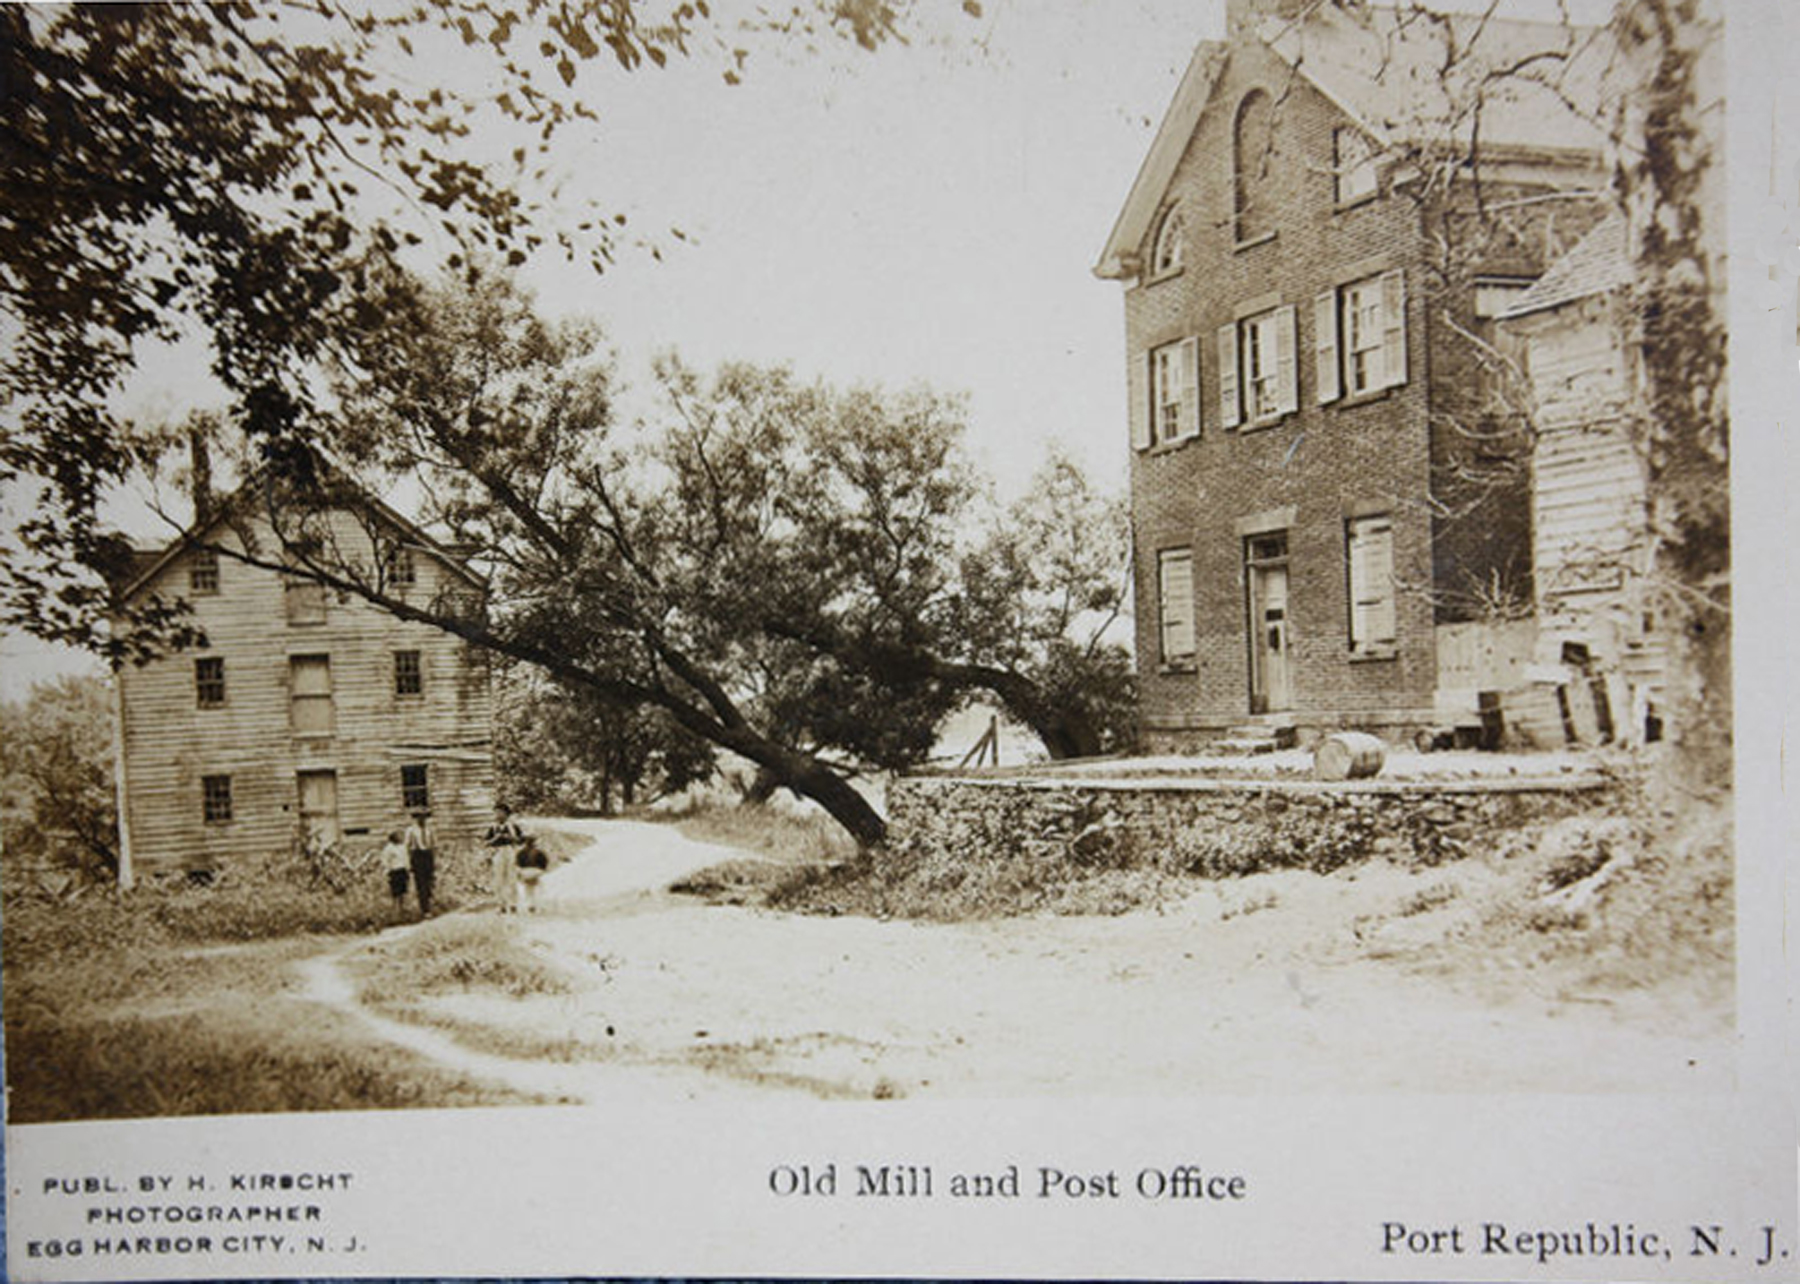 Port Republic - The Old Mill and Post Office - c 1910